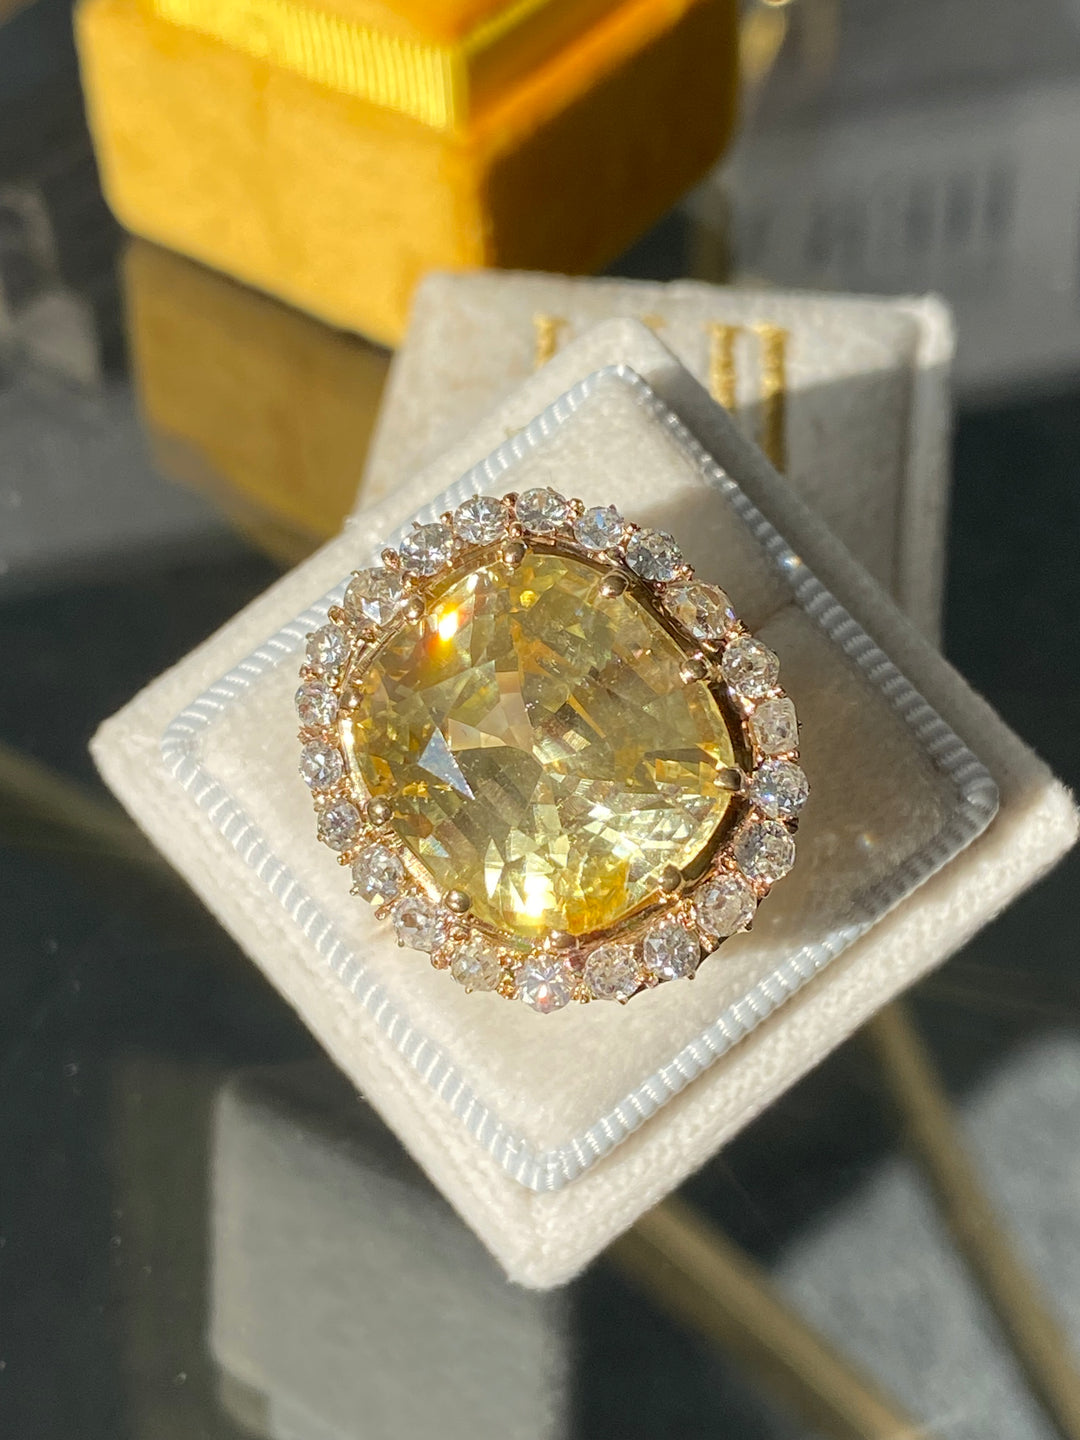 23.62 Carat Certified Unheated Yellow Sapphire and Old Cut Diamond Antique Ring